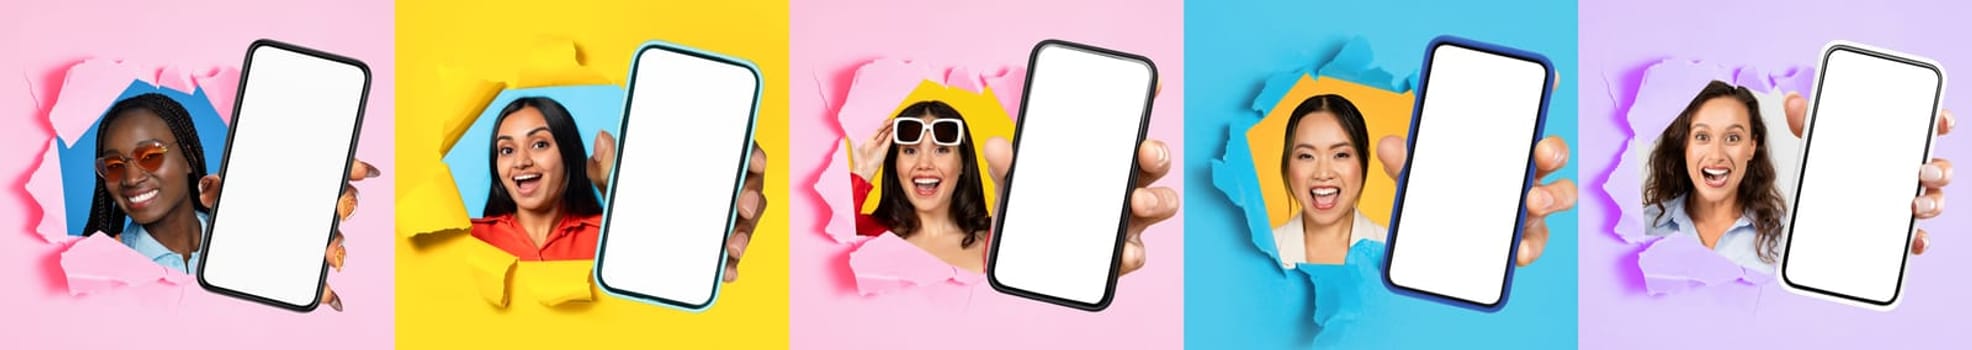 Vibrant, cheerful people with stylish sunglasses showcasing blank smartphones through torn colorful paper